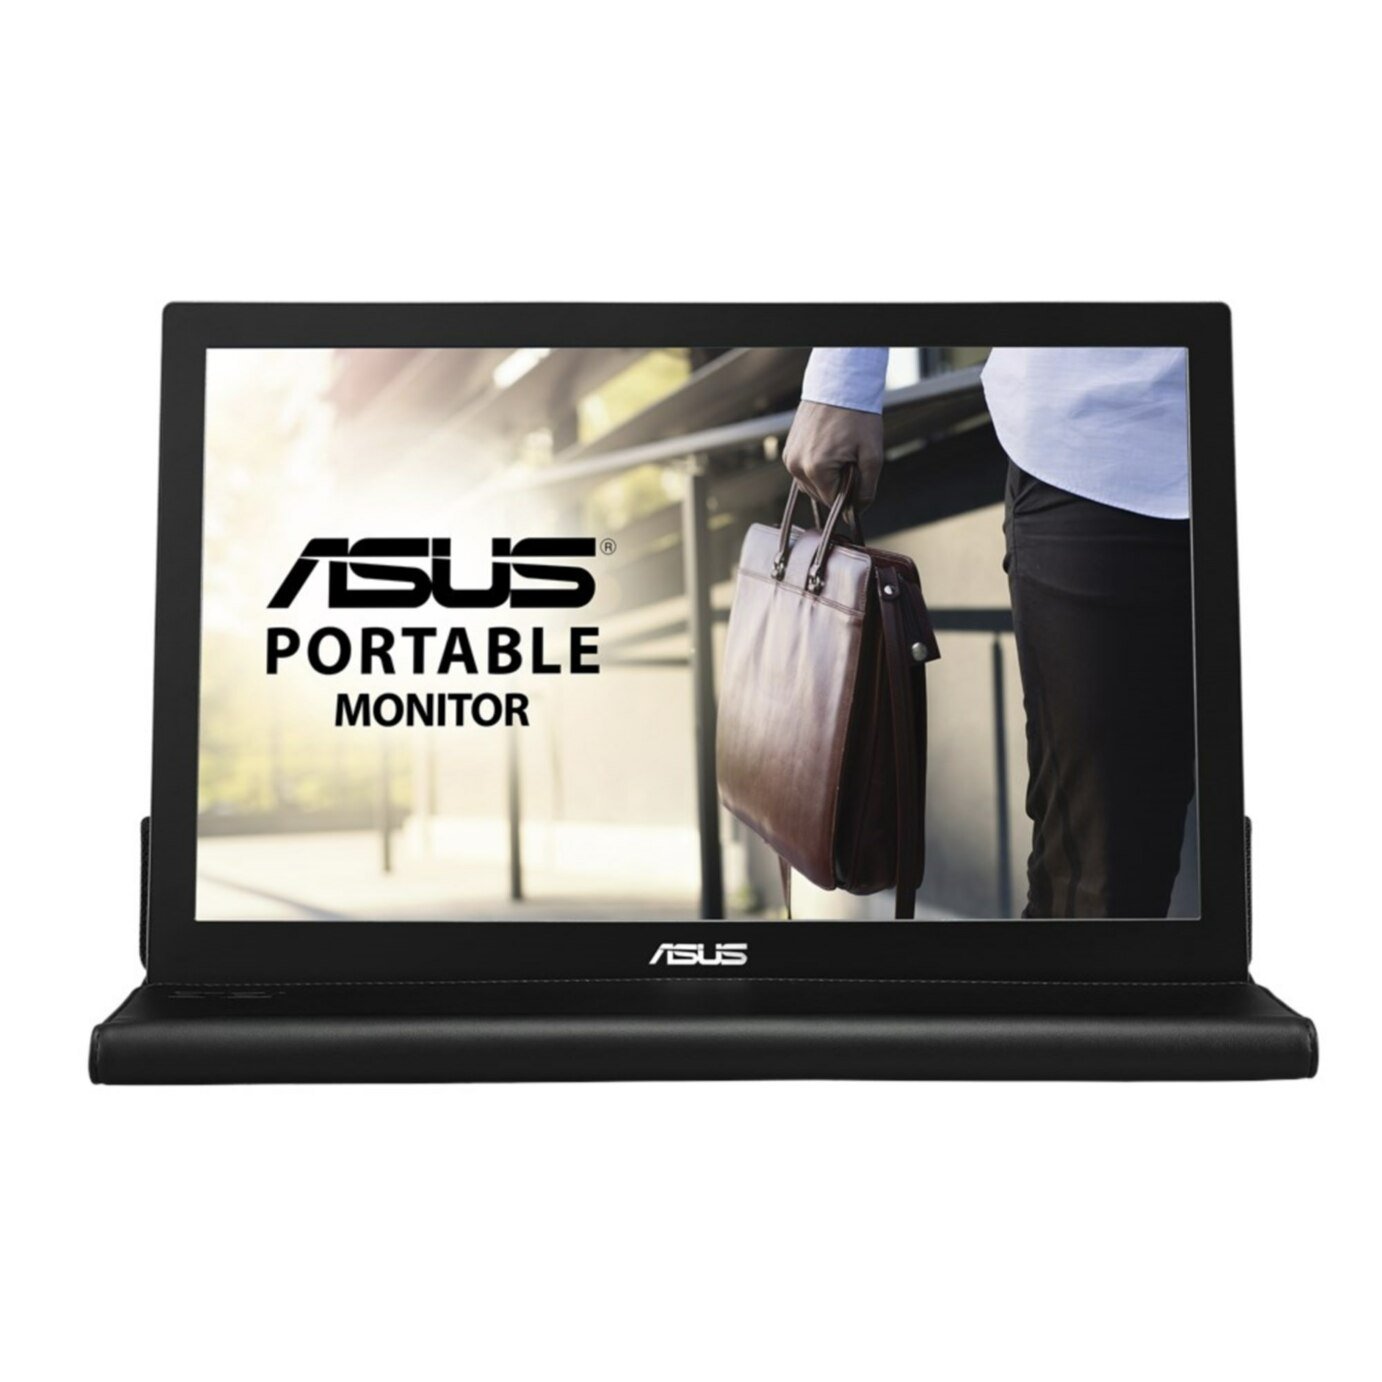 ASUS MB168B 15.6in Portable Monitor